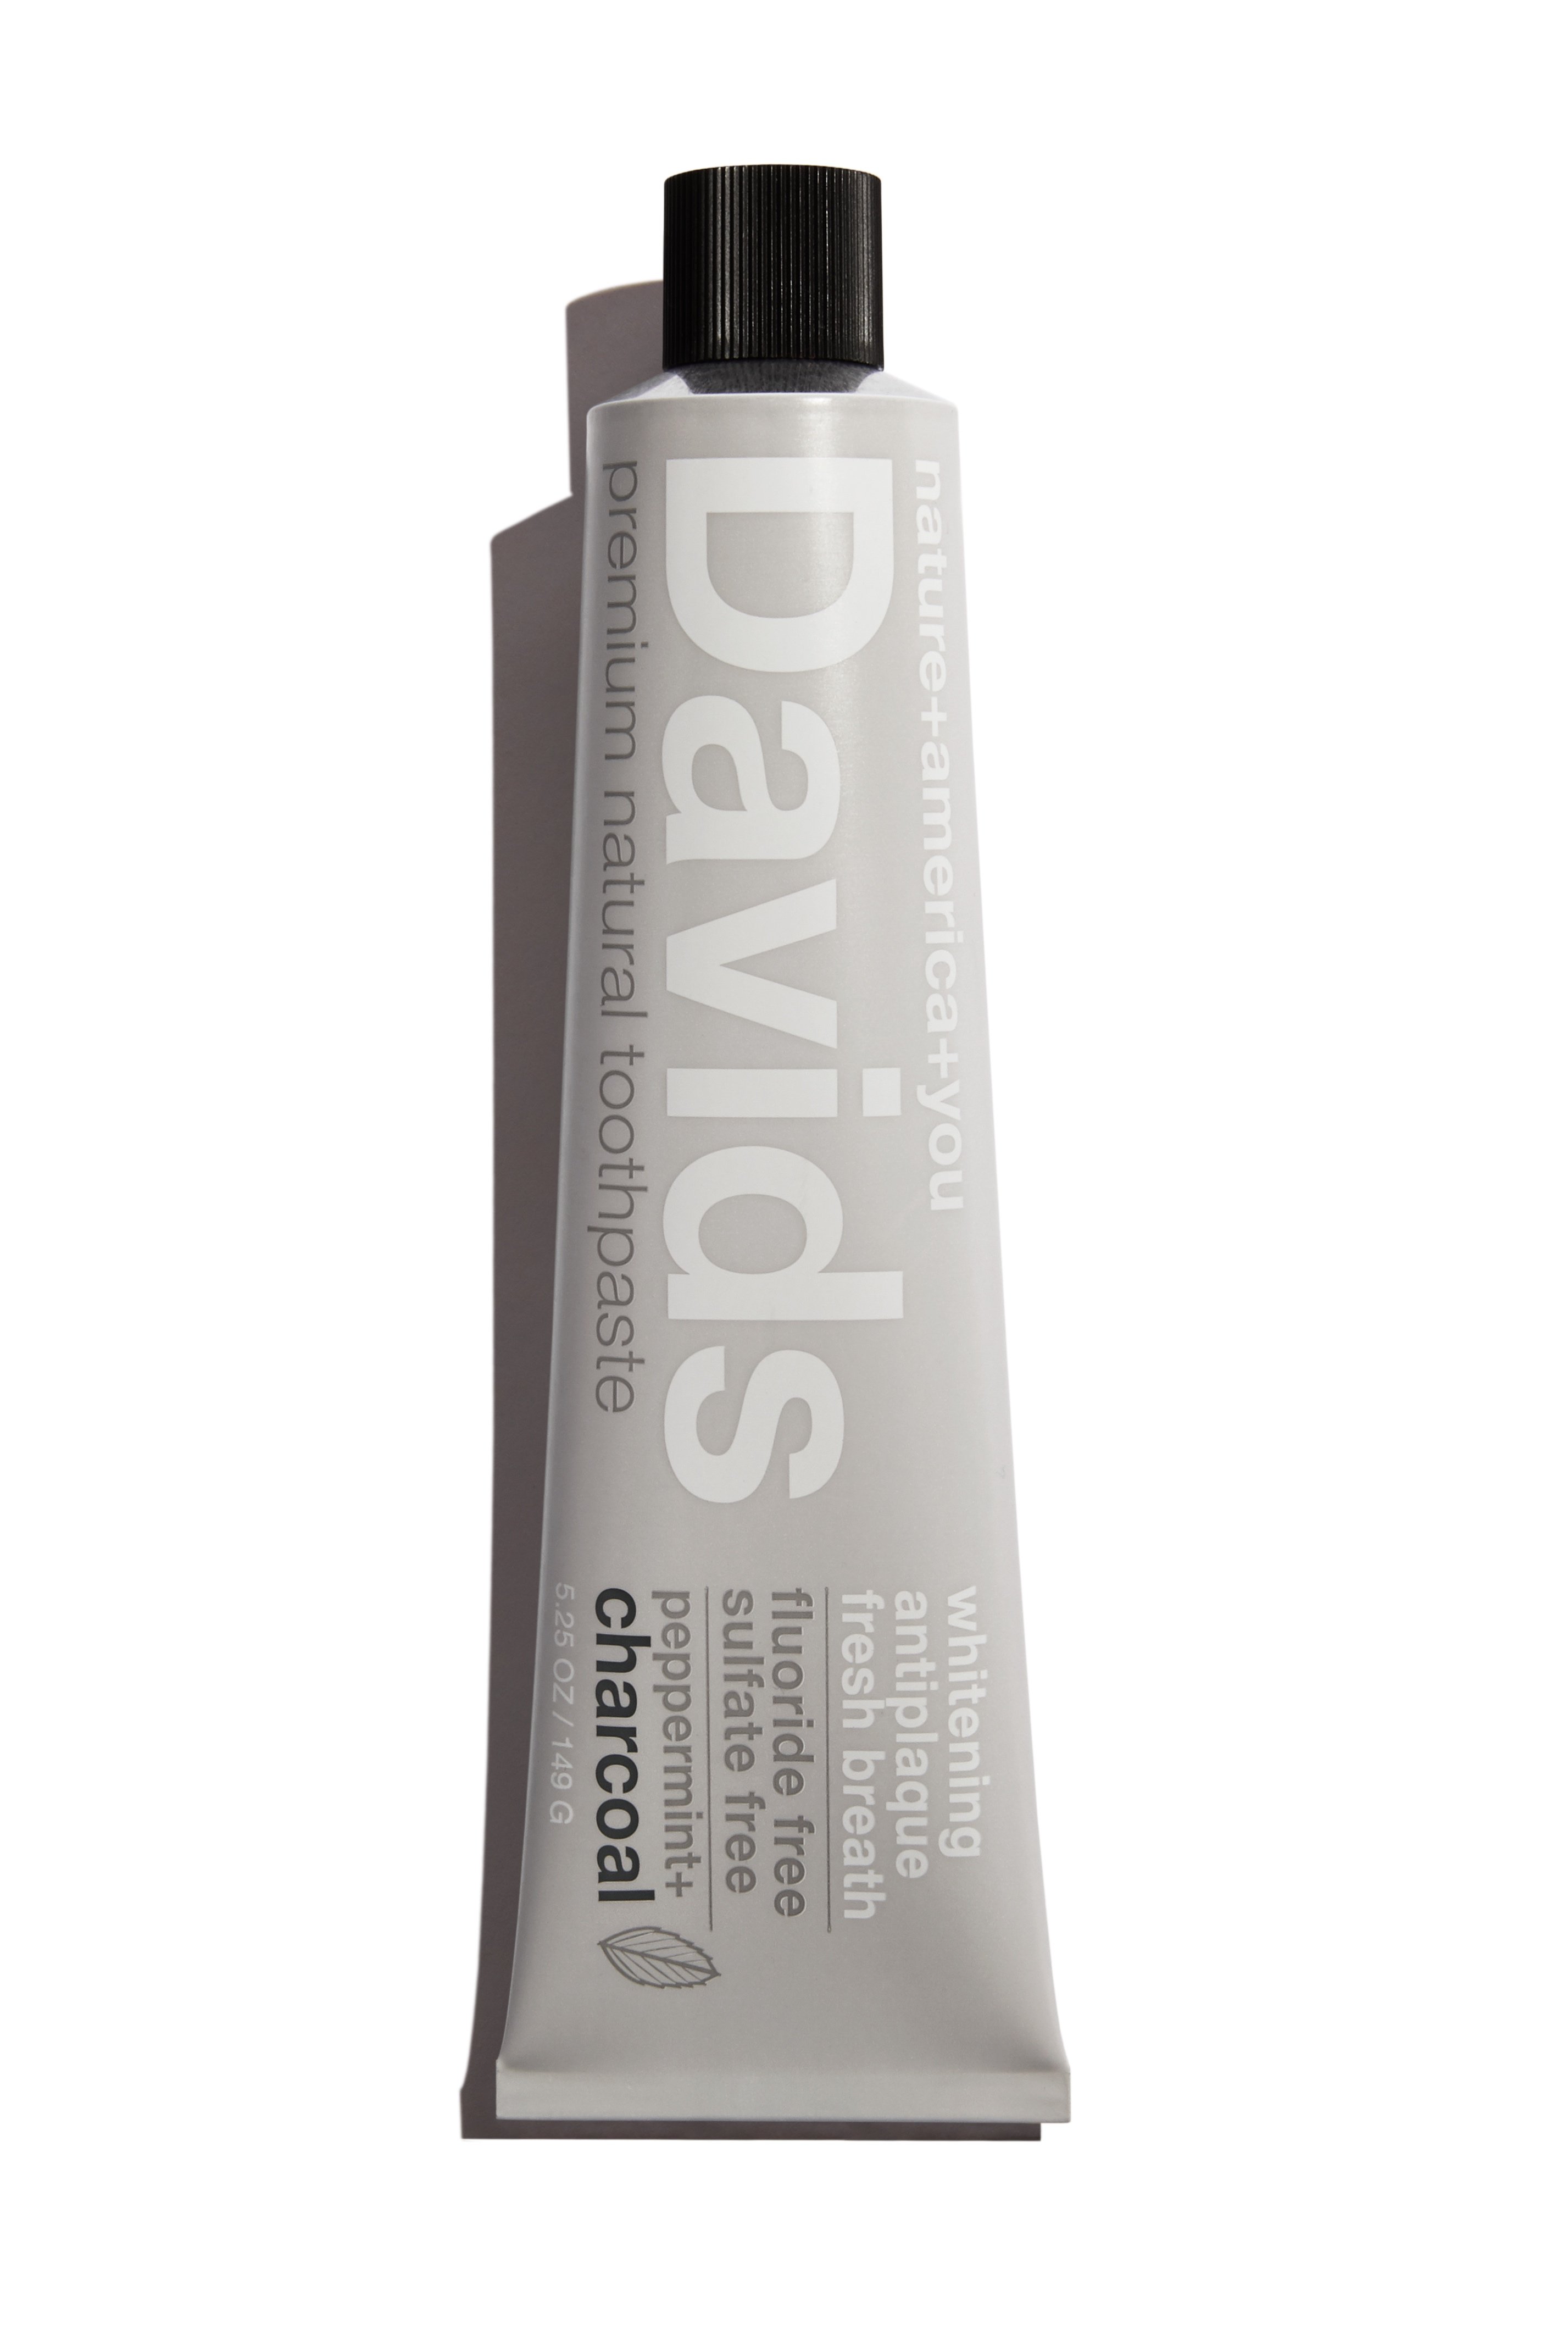 Davids Premium Natural Toothpaste, Peppermint + Charcoal